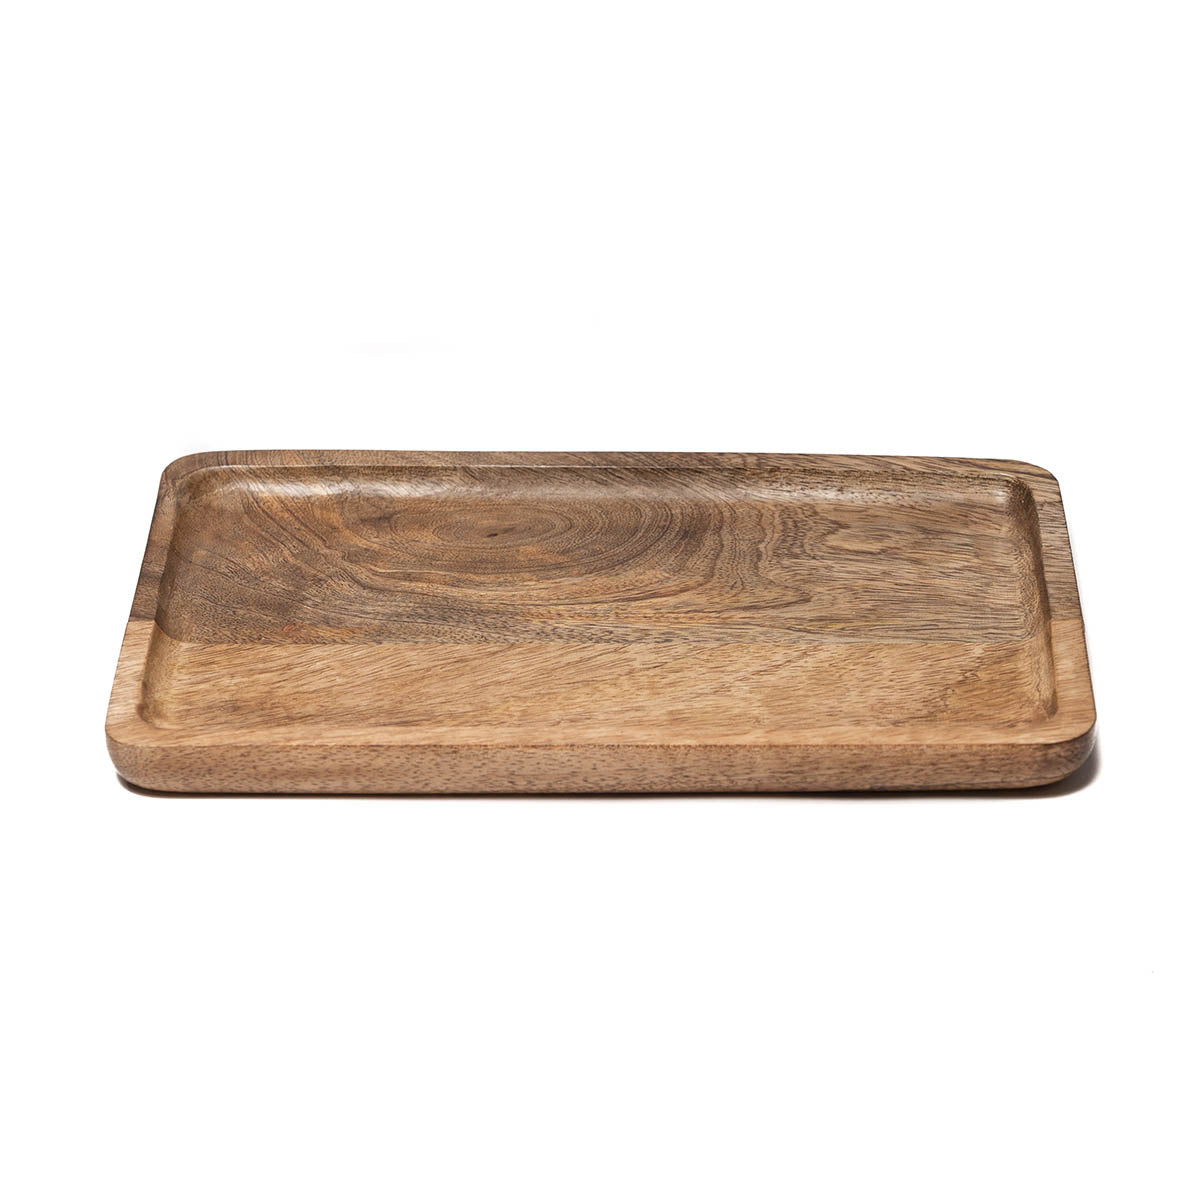 Wooden tray, round edged rustic serving tray, farmhouse decor, 6X10 inches